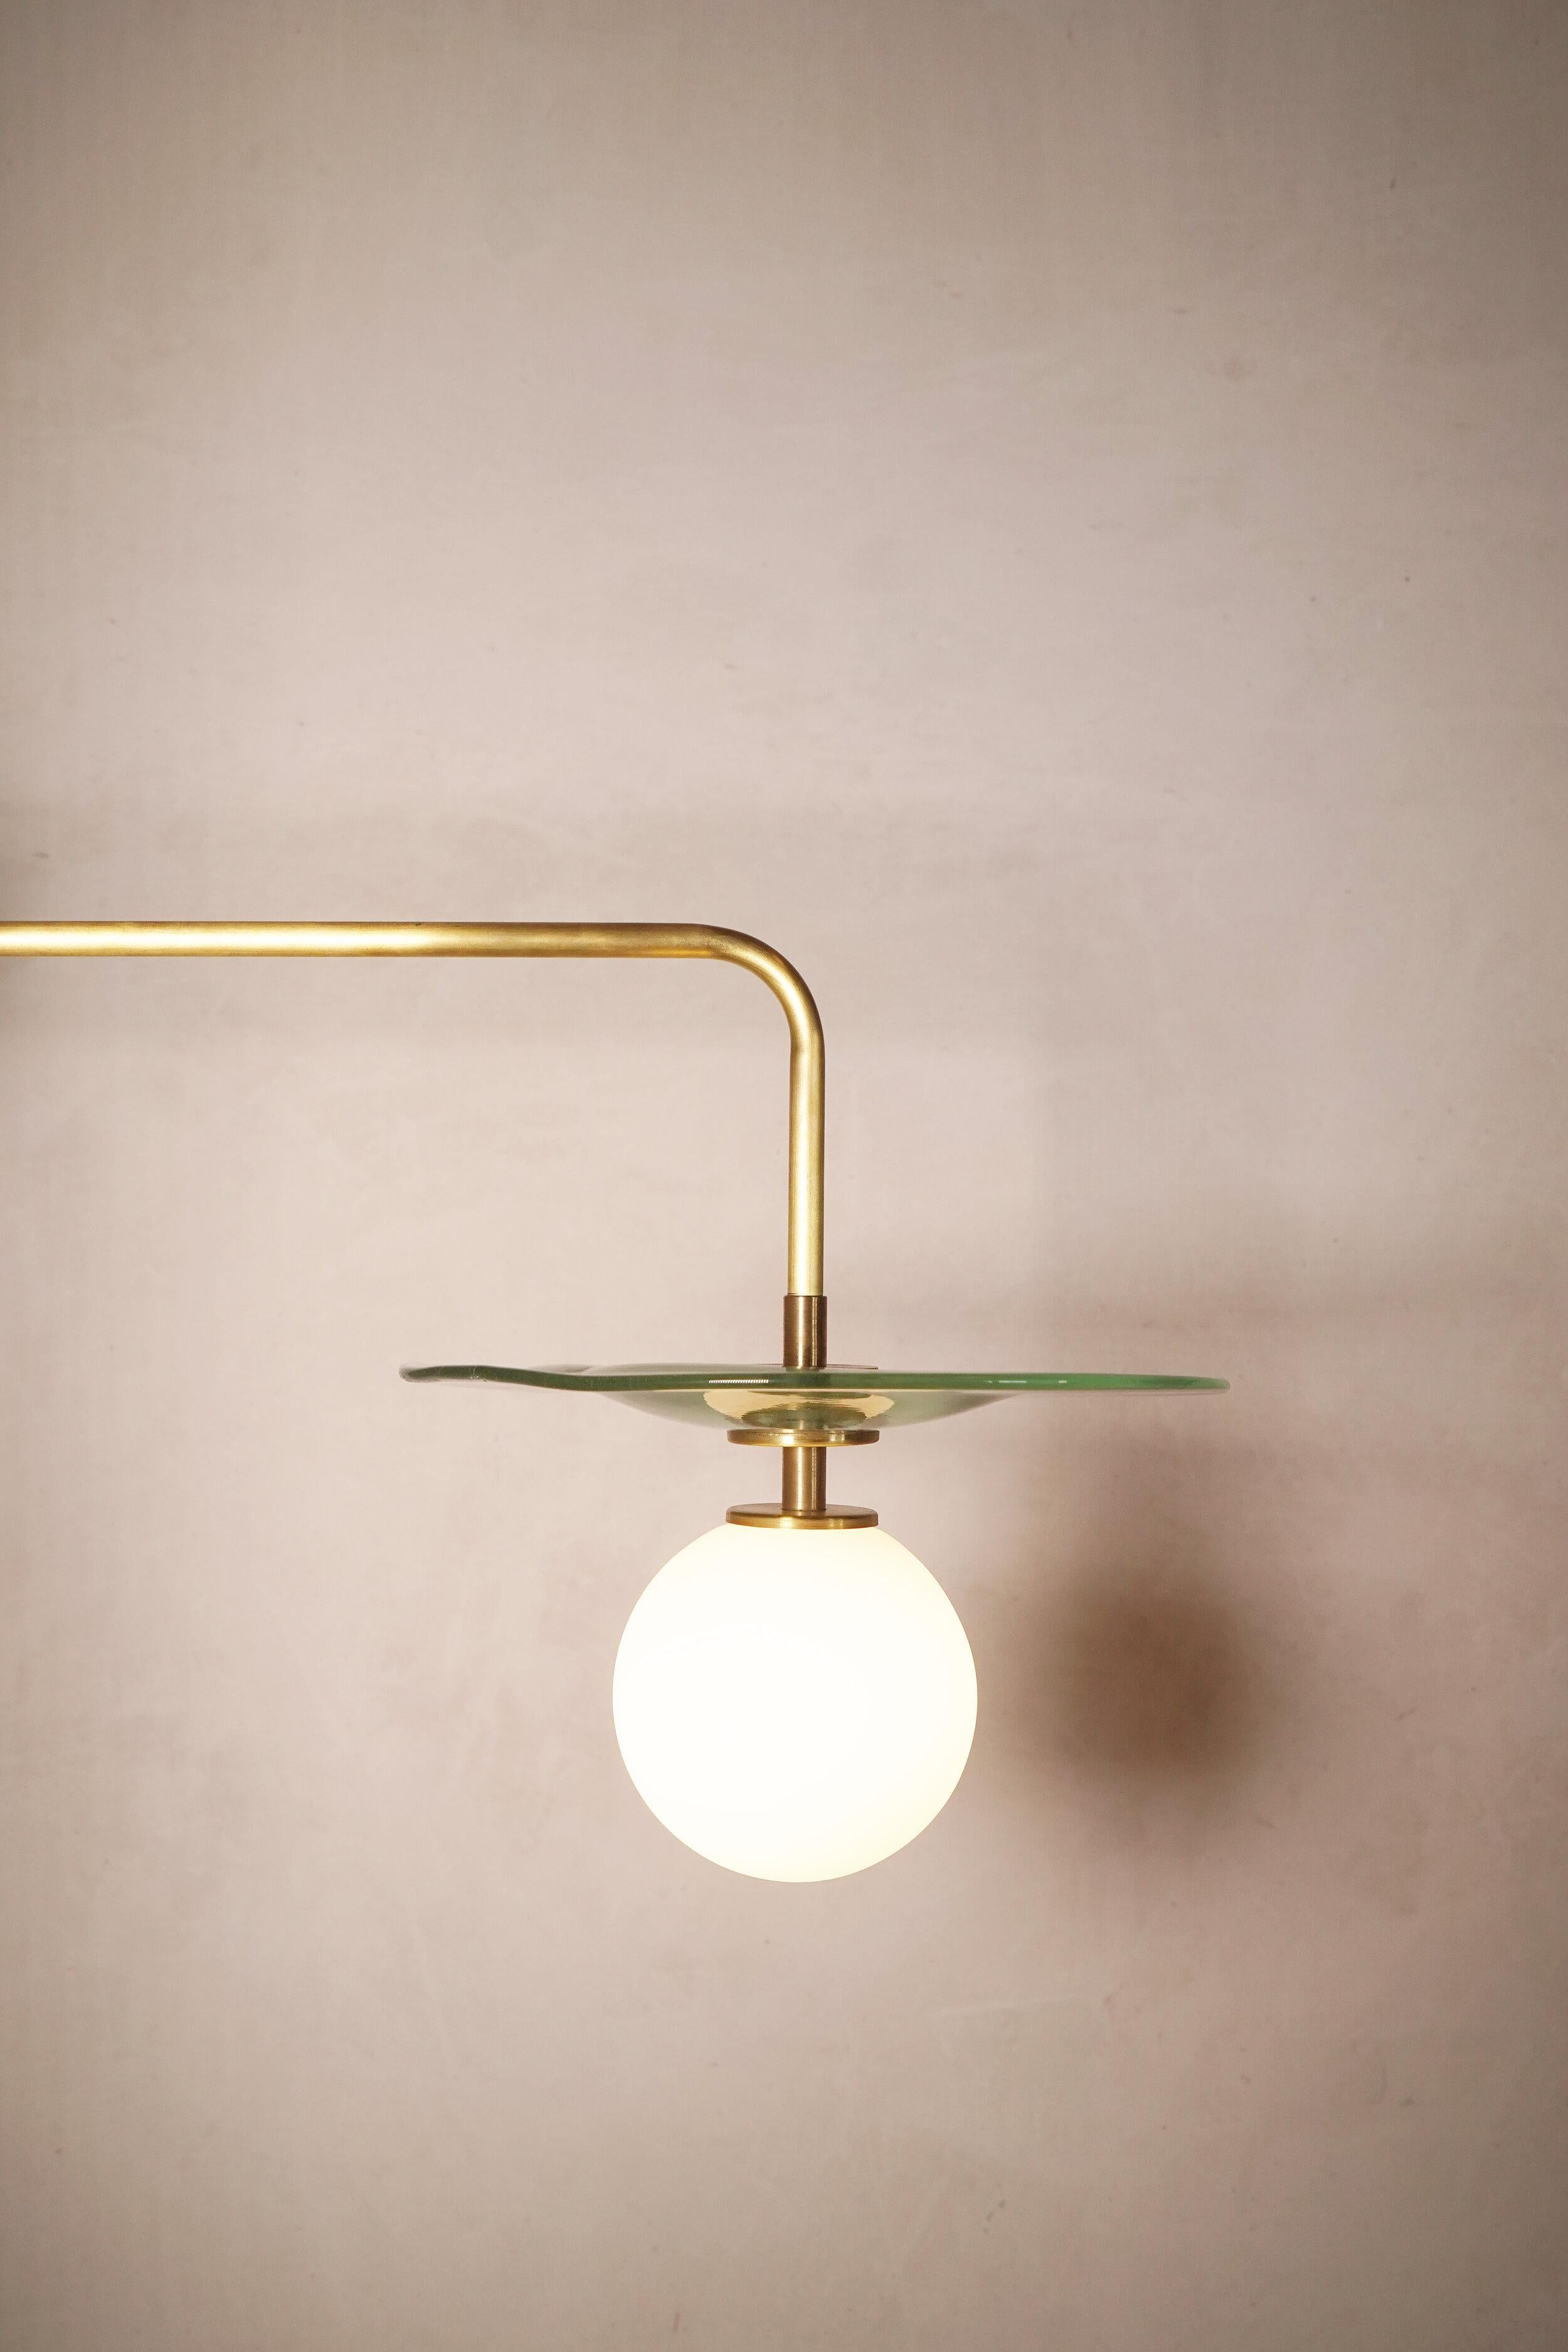 Spanish Plat Mini Wall Light by Contain